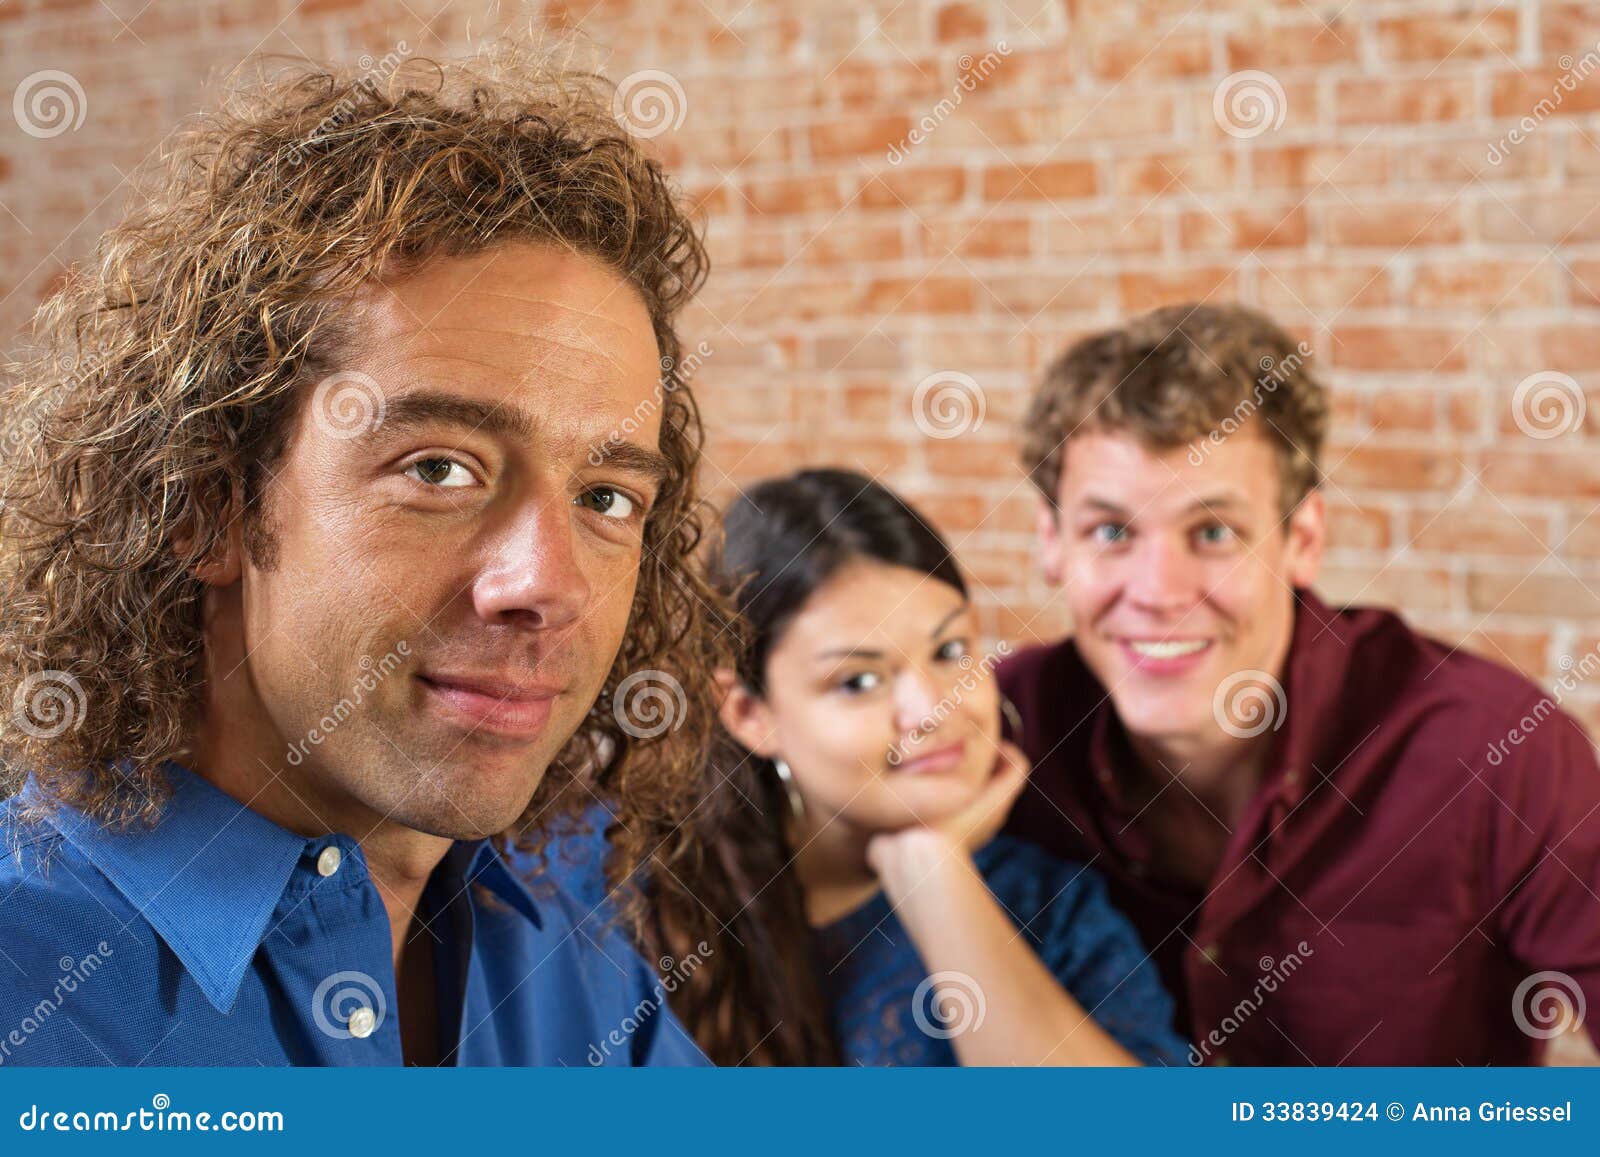 Three Young Adult Friends stock photo. Image of female - 33839424